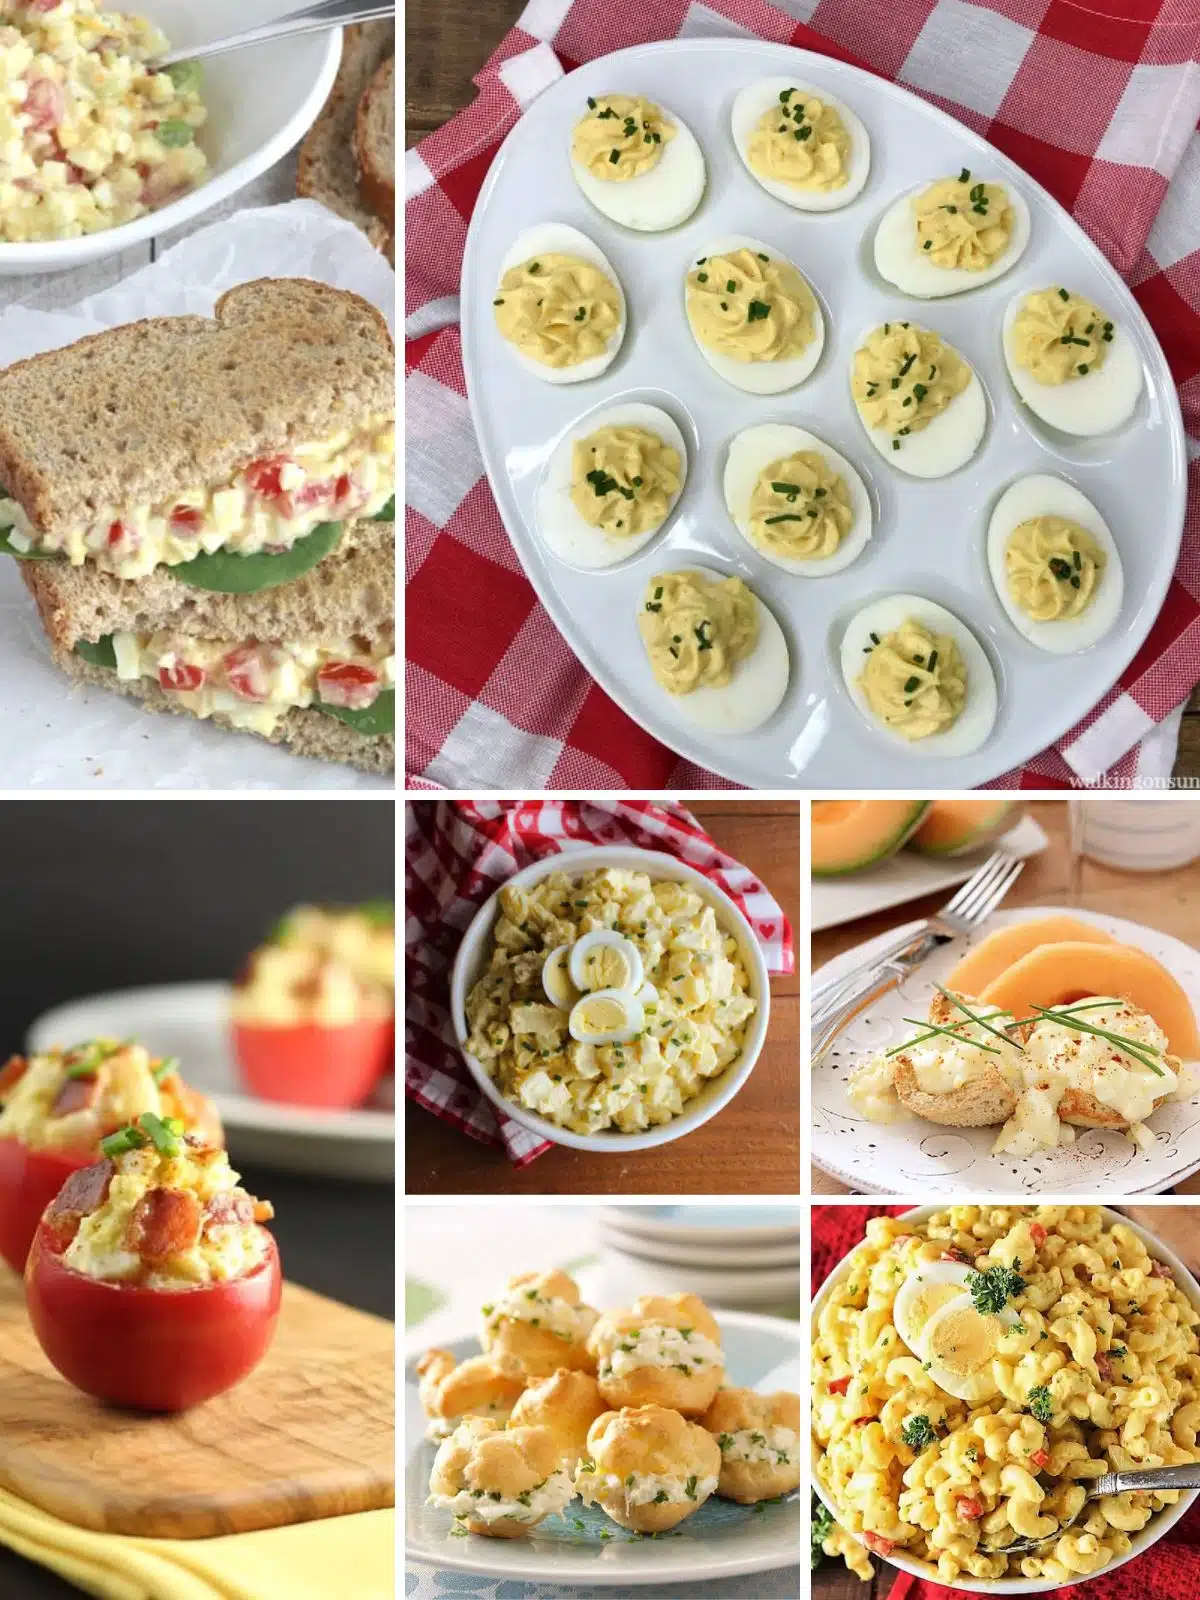 recipes that use leftover hard boiled eggs from Easter.